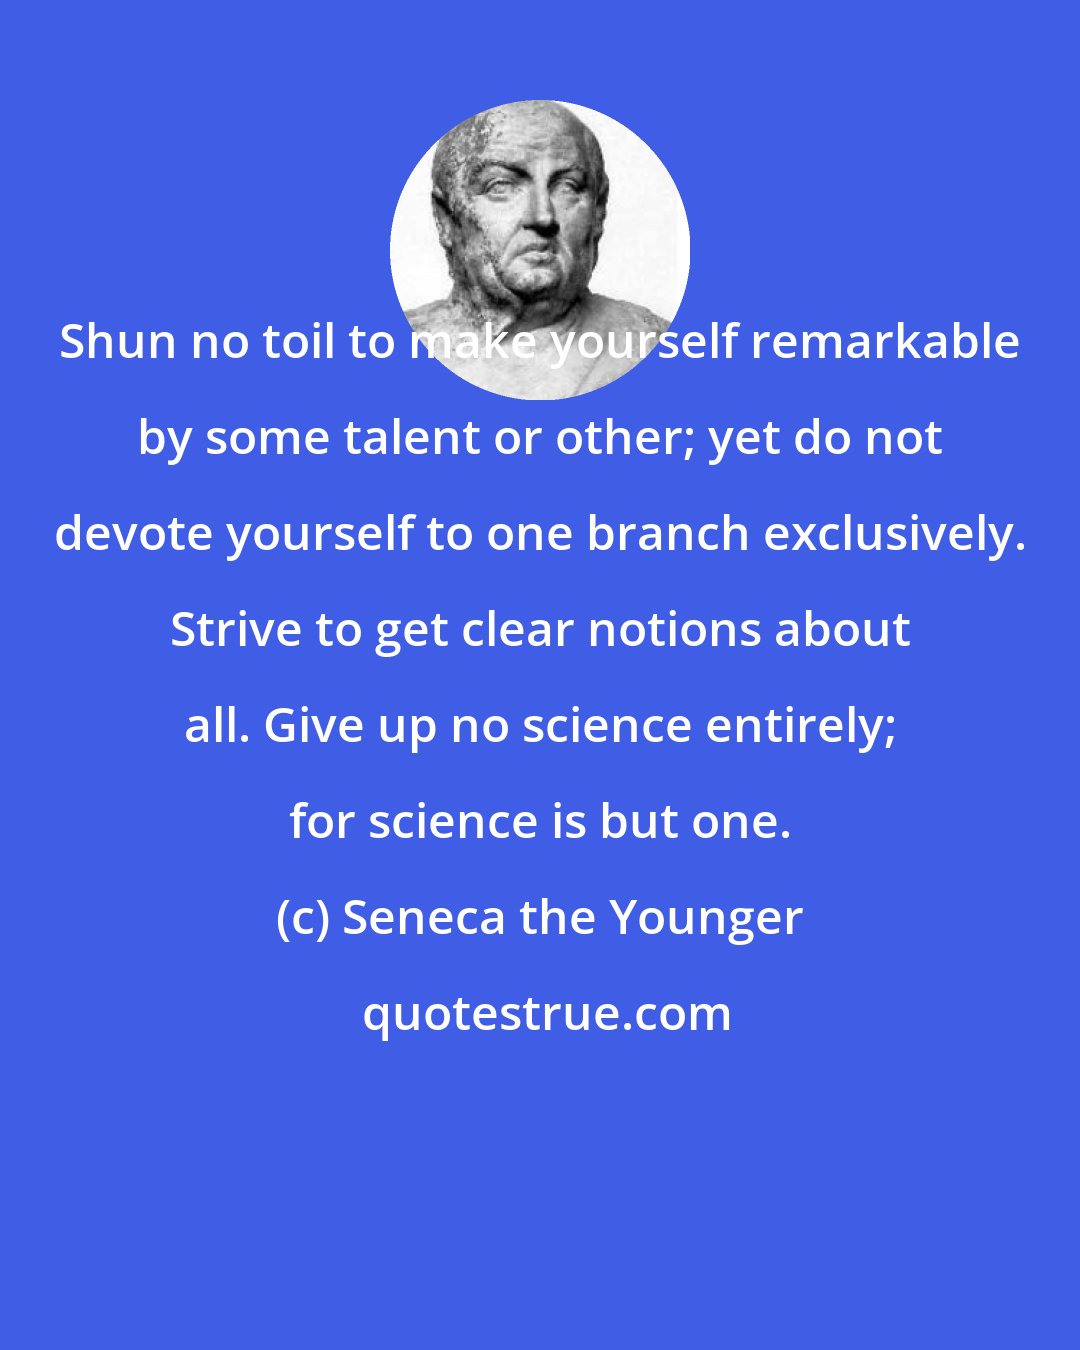 Seneca the Younger: Shun no toil to make yourself remarkable by some talent or other; yet do not devote yourself to one branch exclusively. Strive to get clear notions about all. Give up no science entirely; for science is but one.